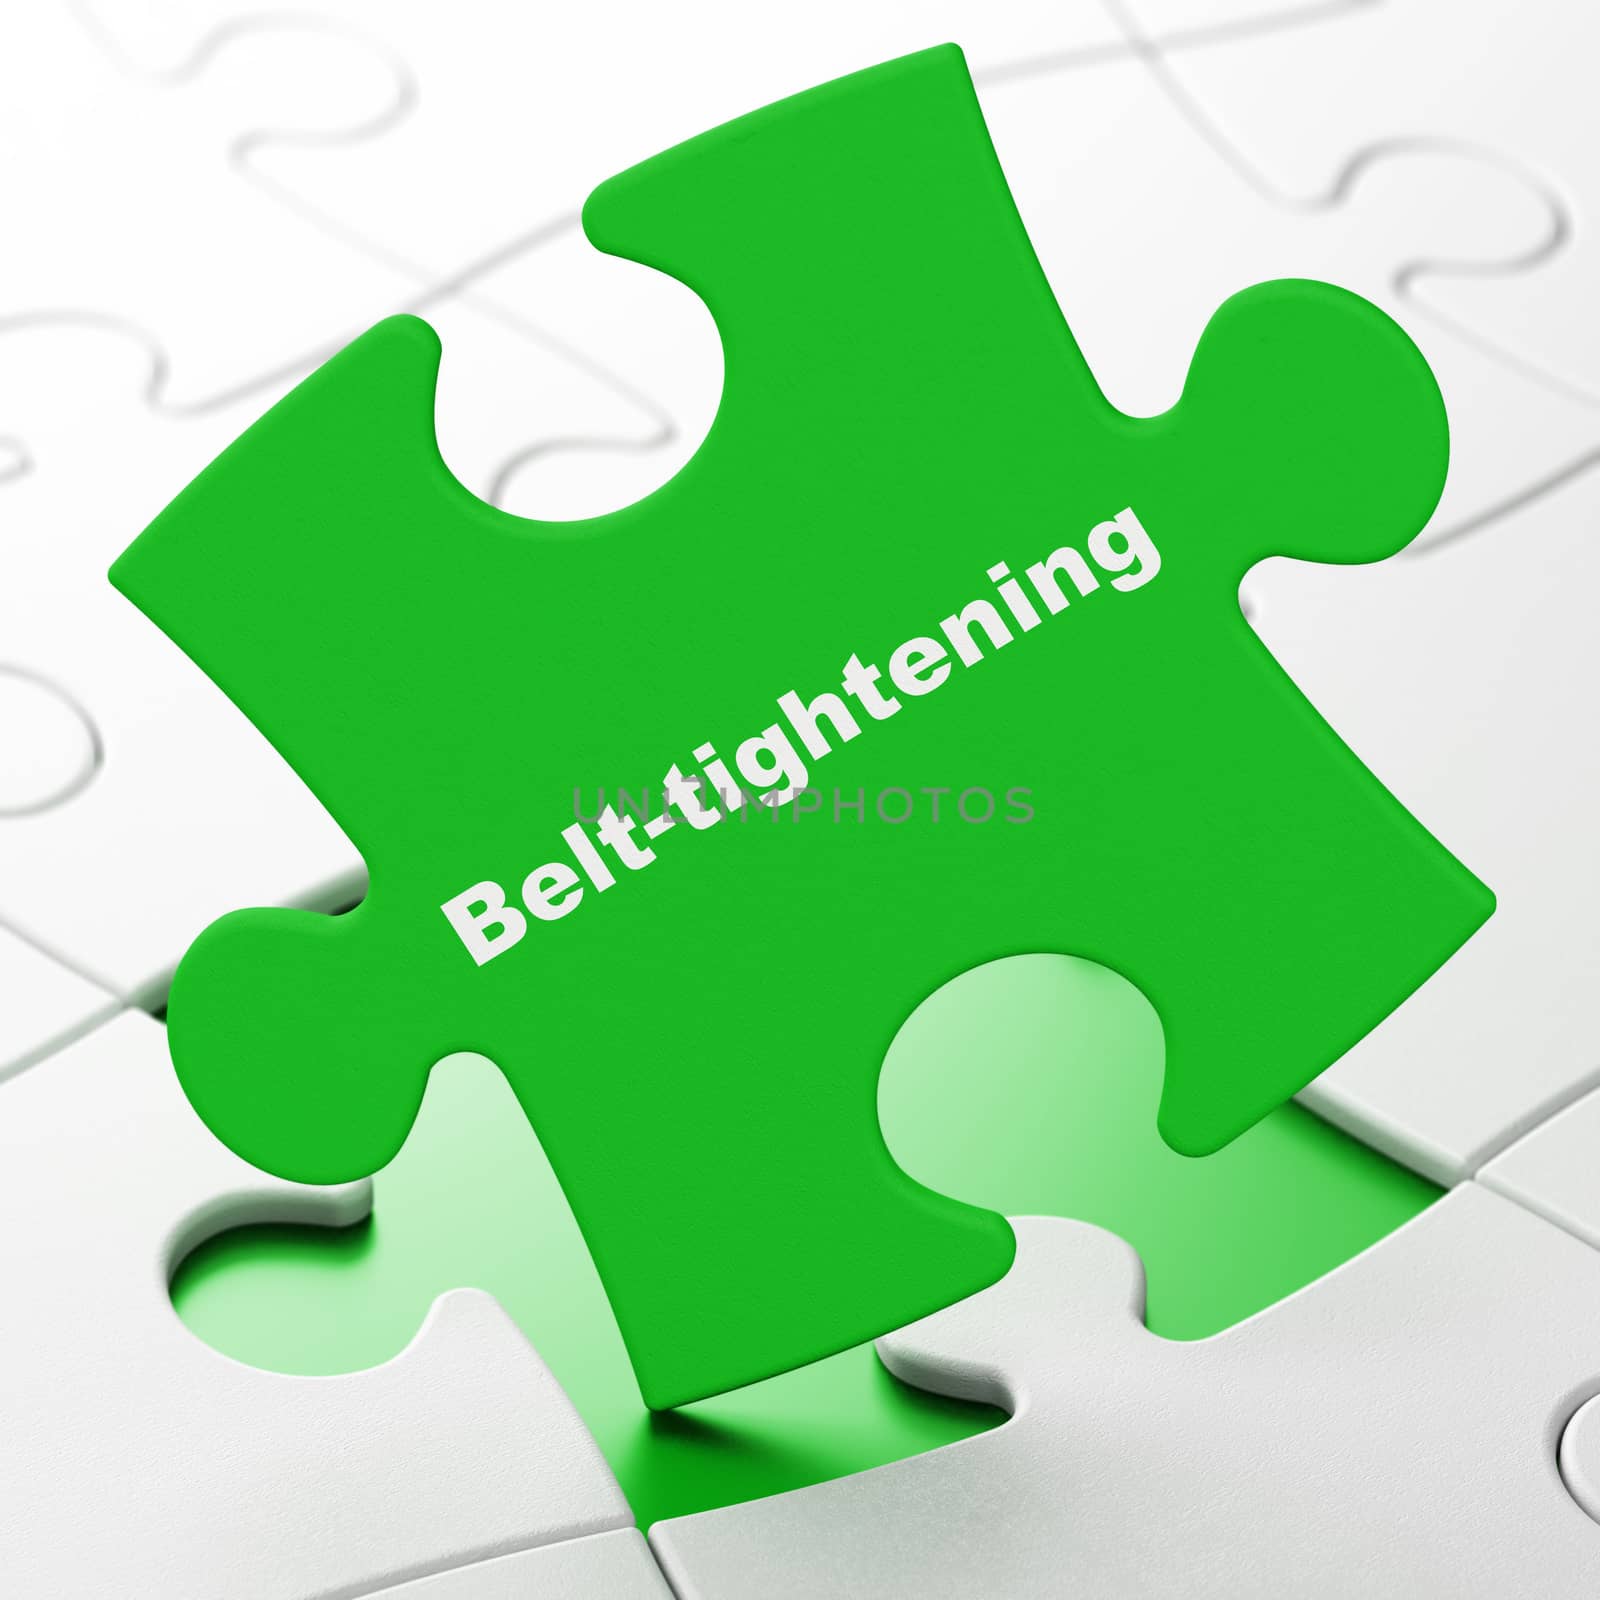 Business concept: Belt-tightening on puzzle background by maxkabakov